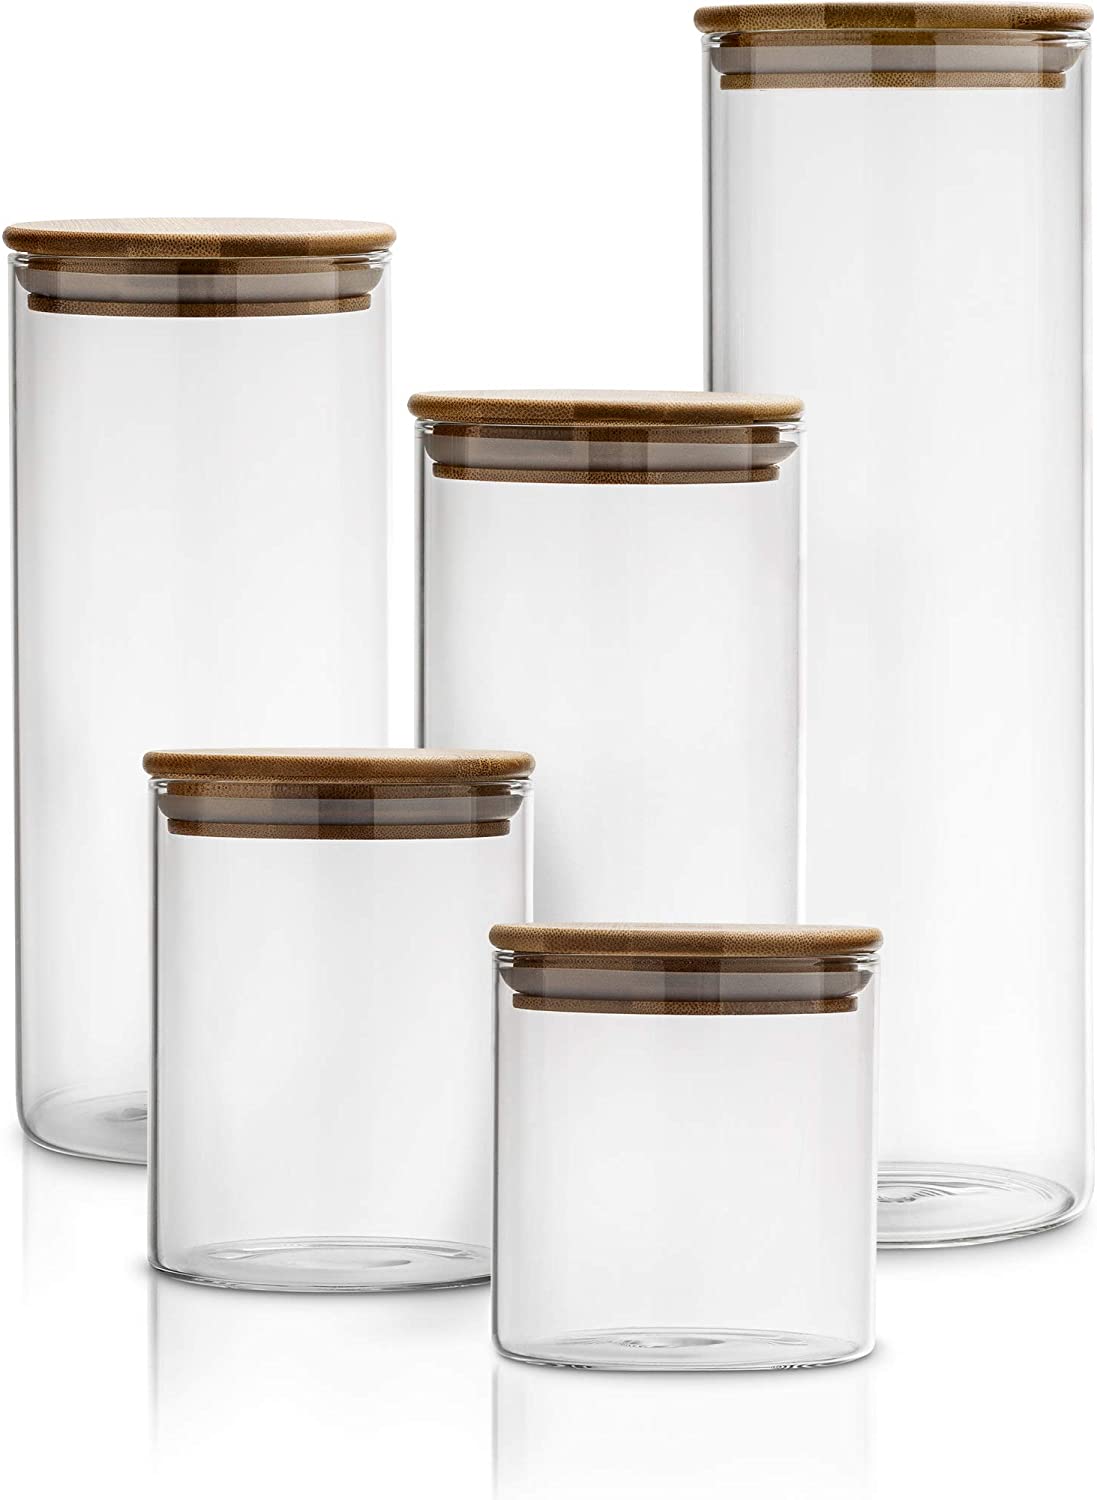 Canister Set of 5, Glass Kitchen Canisters with Airtight Bamboo Lid, Glass Jars